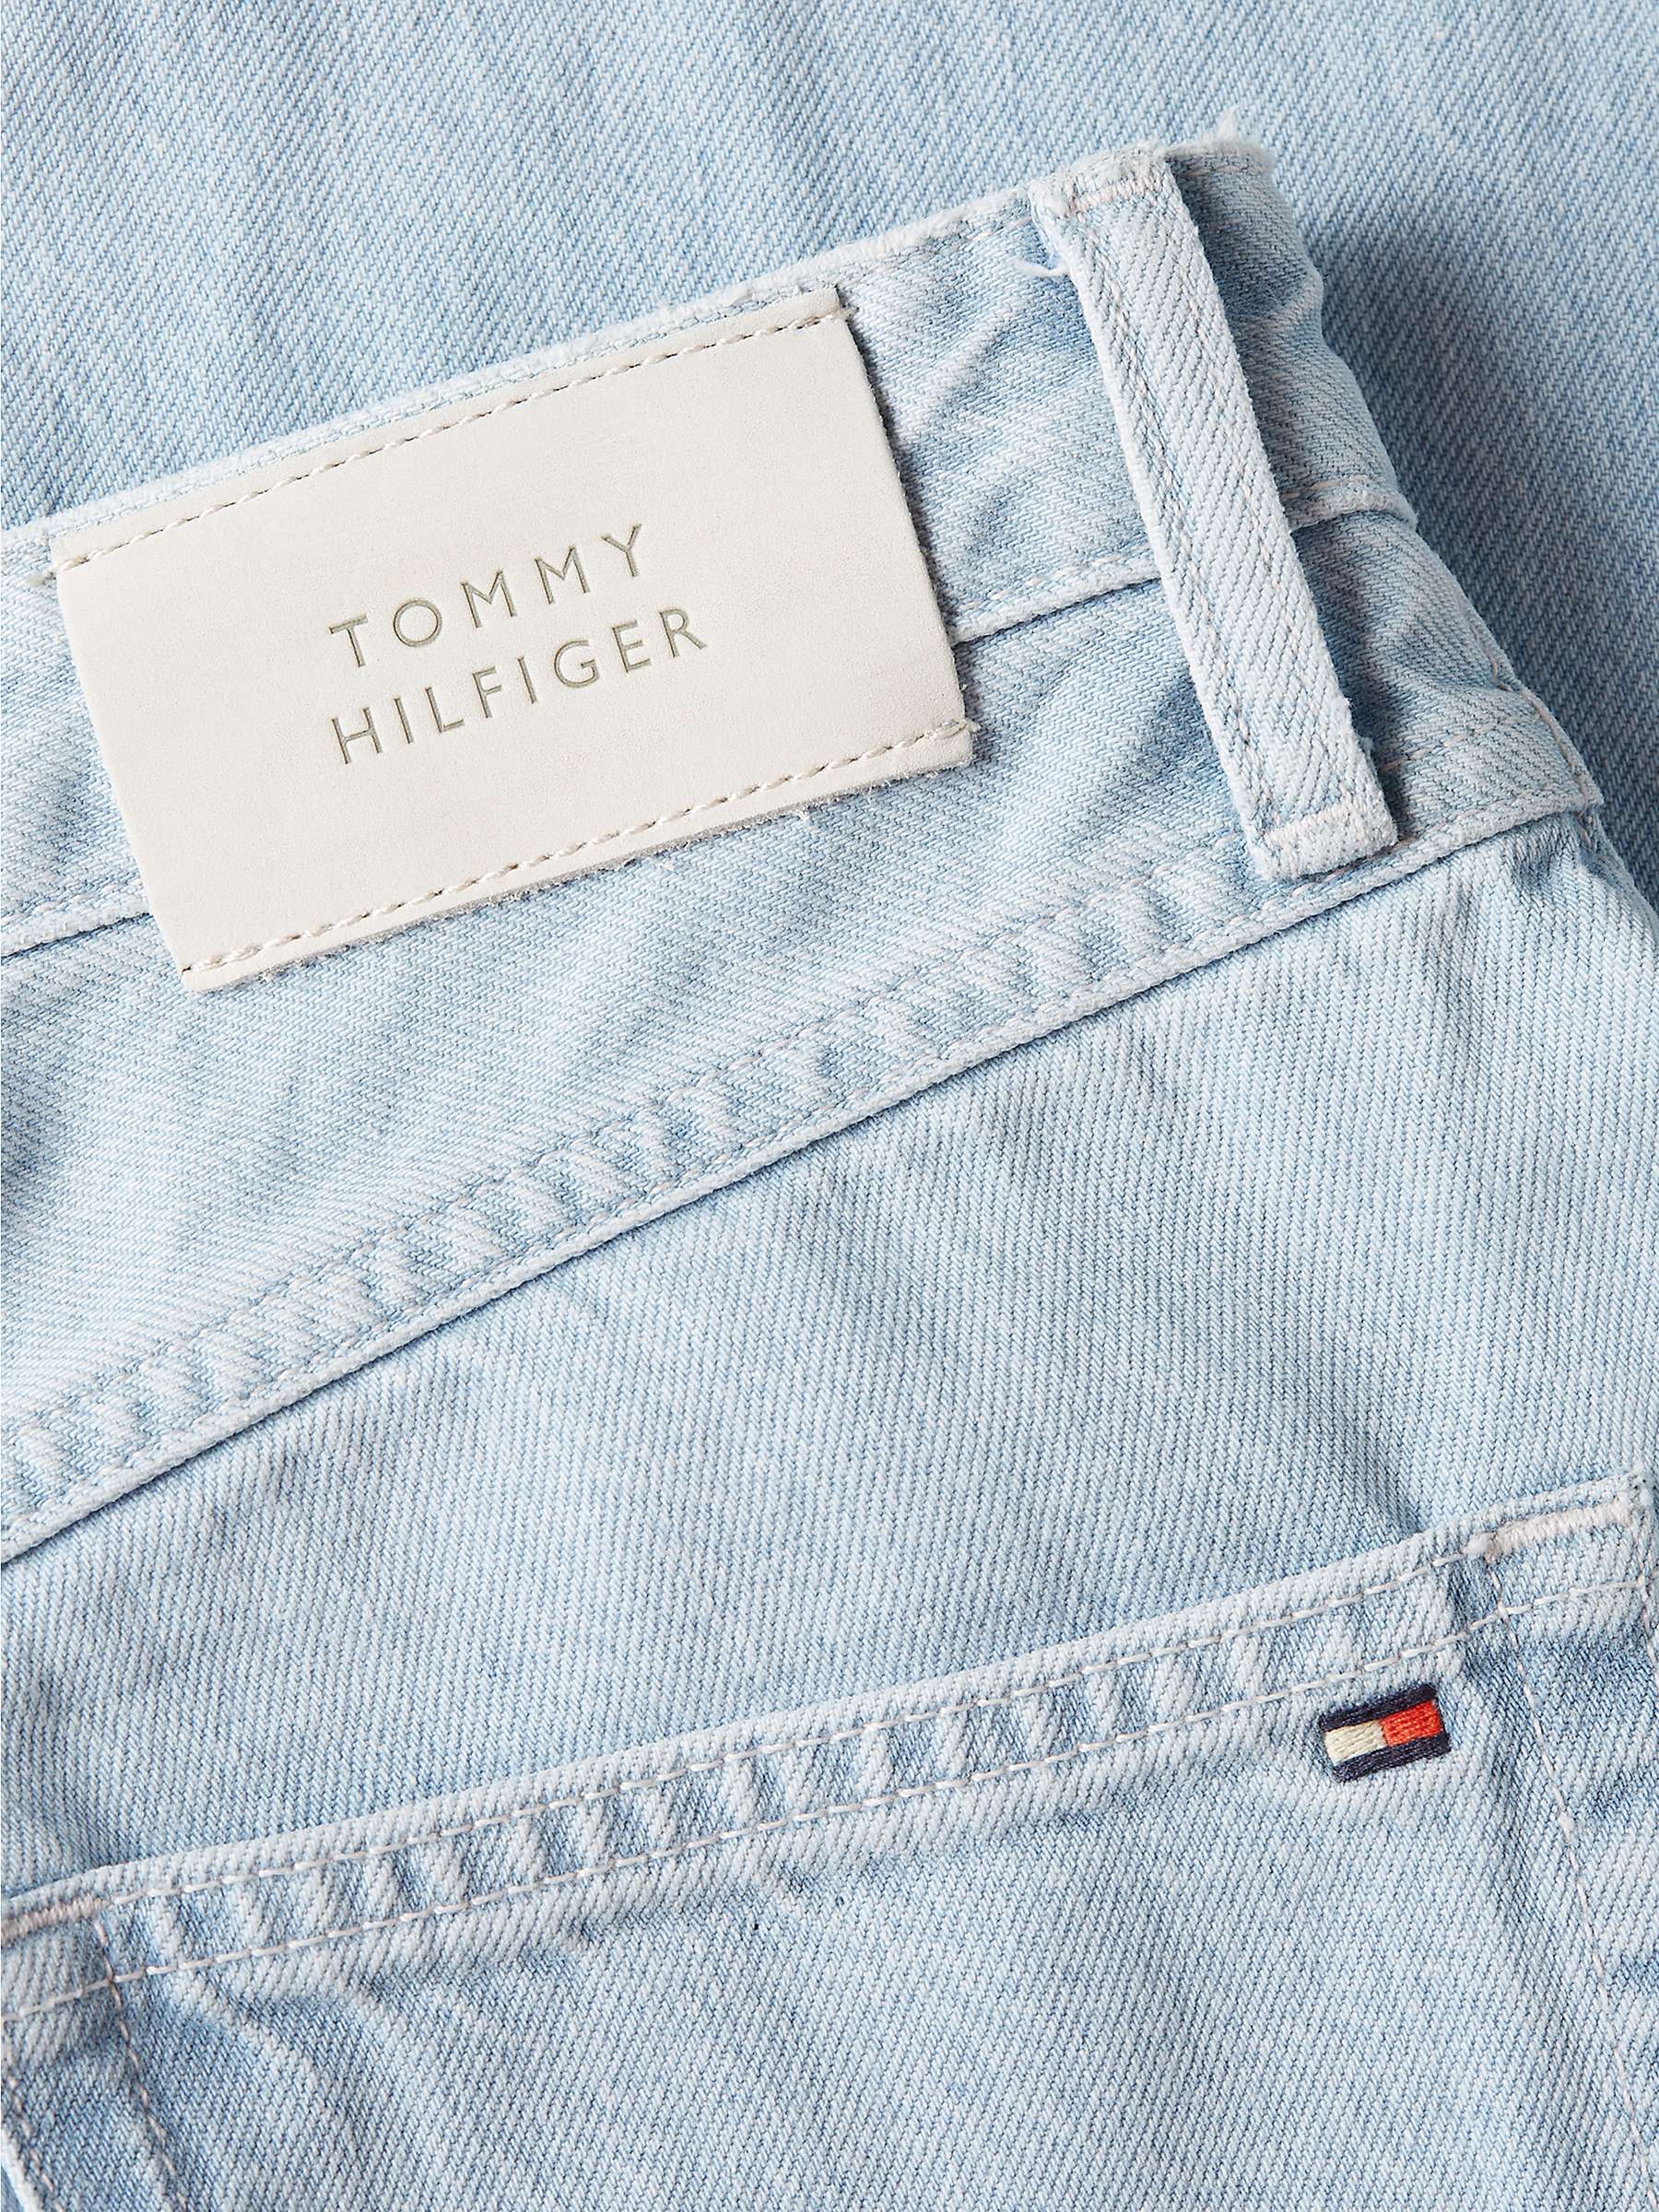 Buy Tommy Hilfiger Relaxed Fit Straight Cut Jeans, Mia Online at johnlewis.com